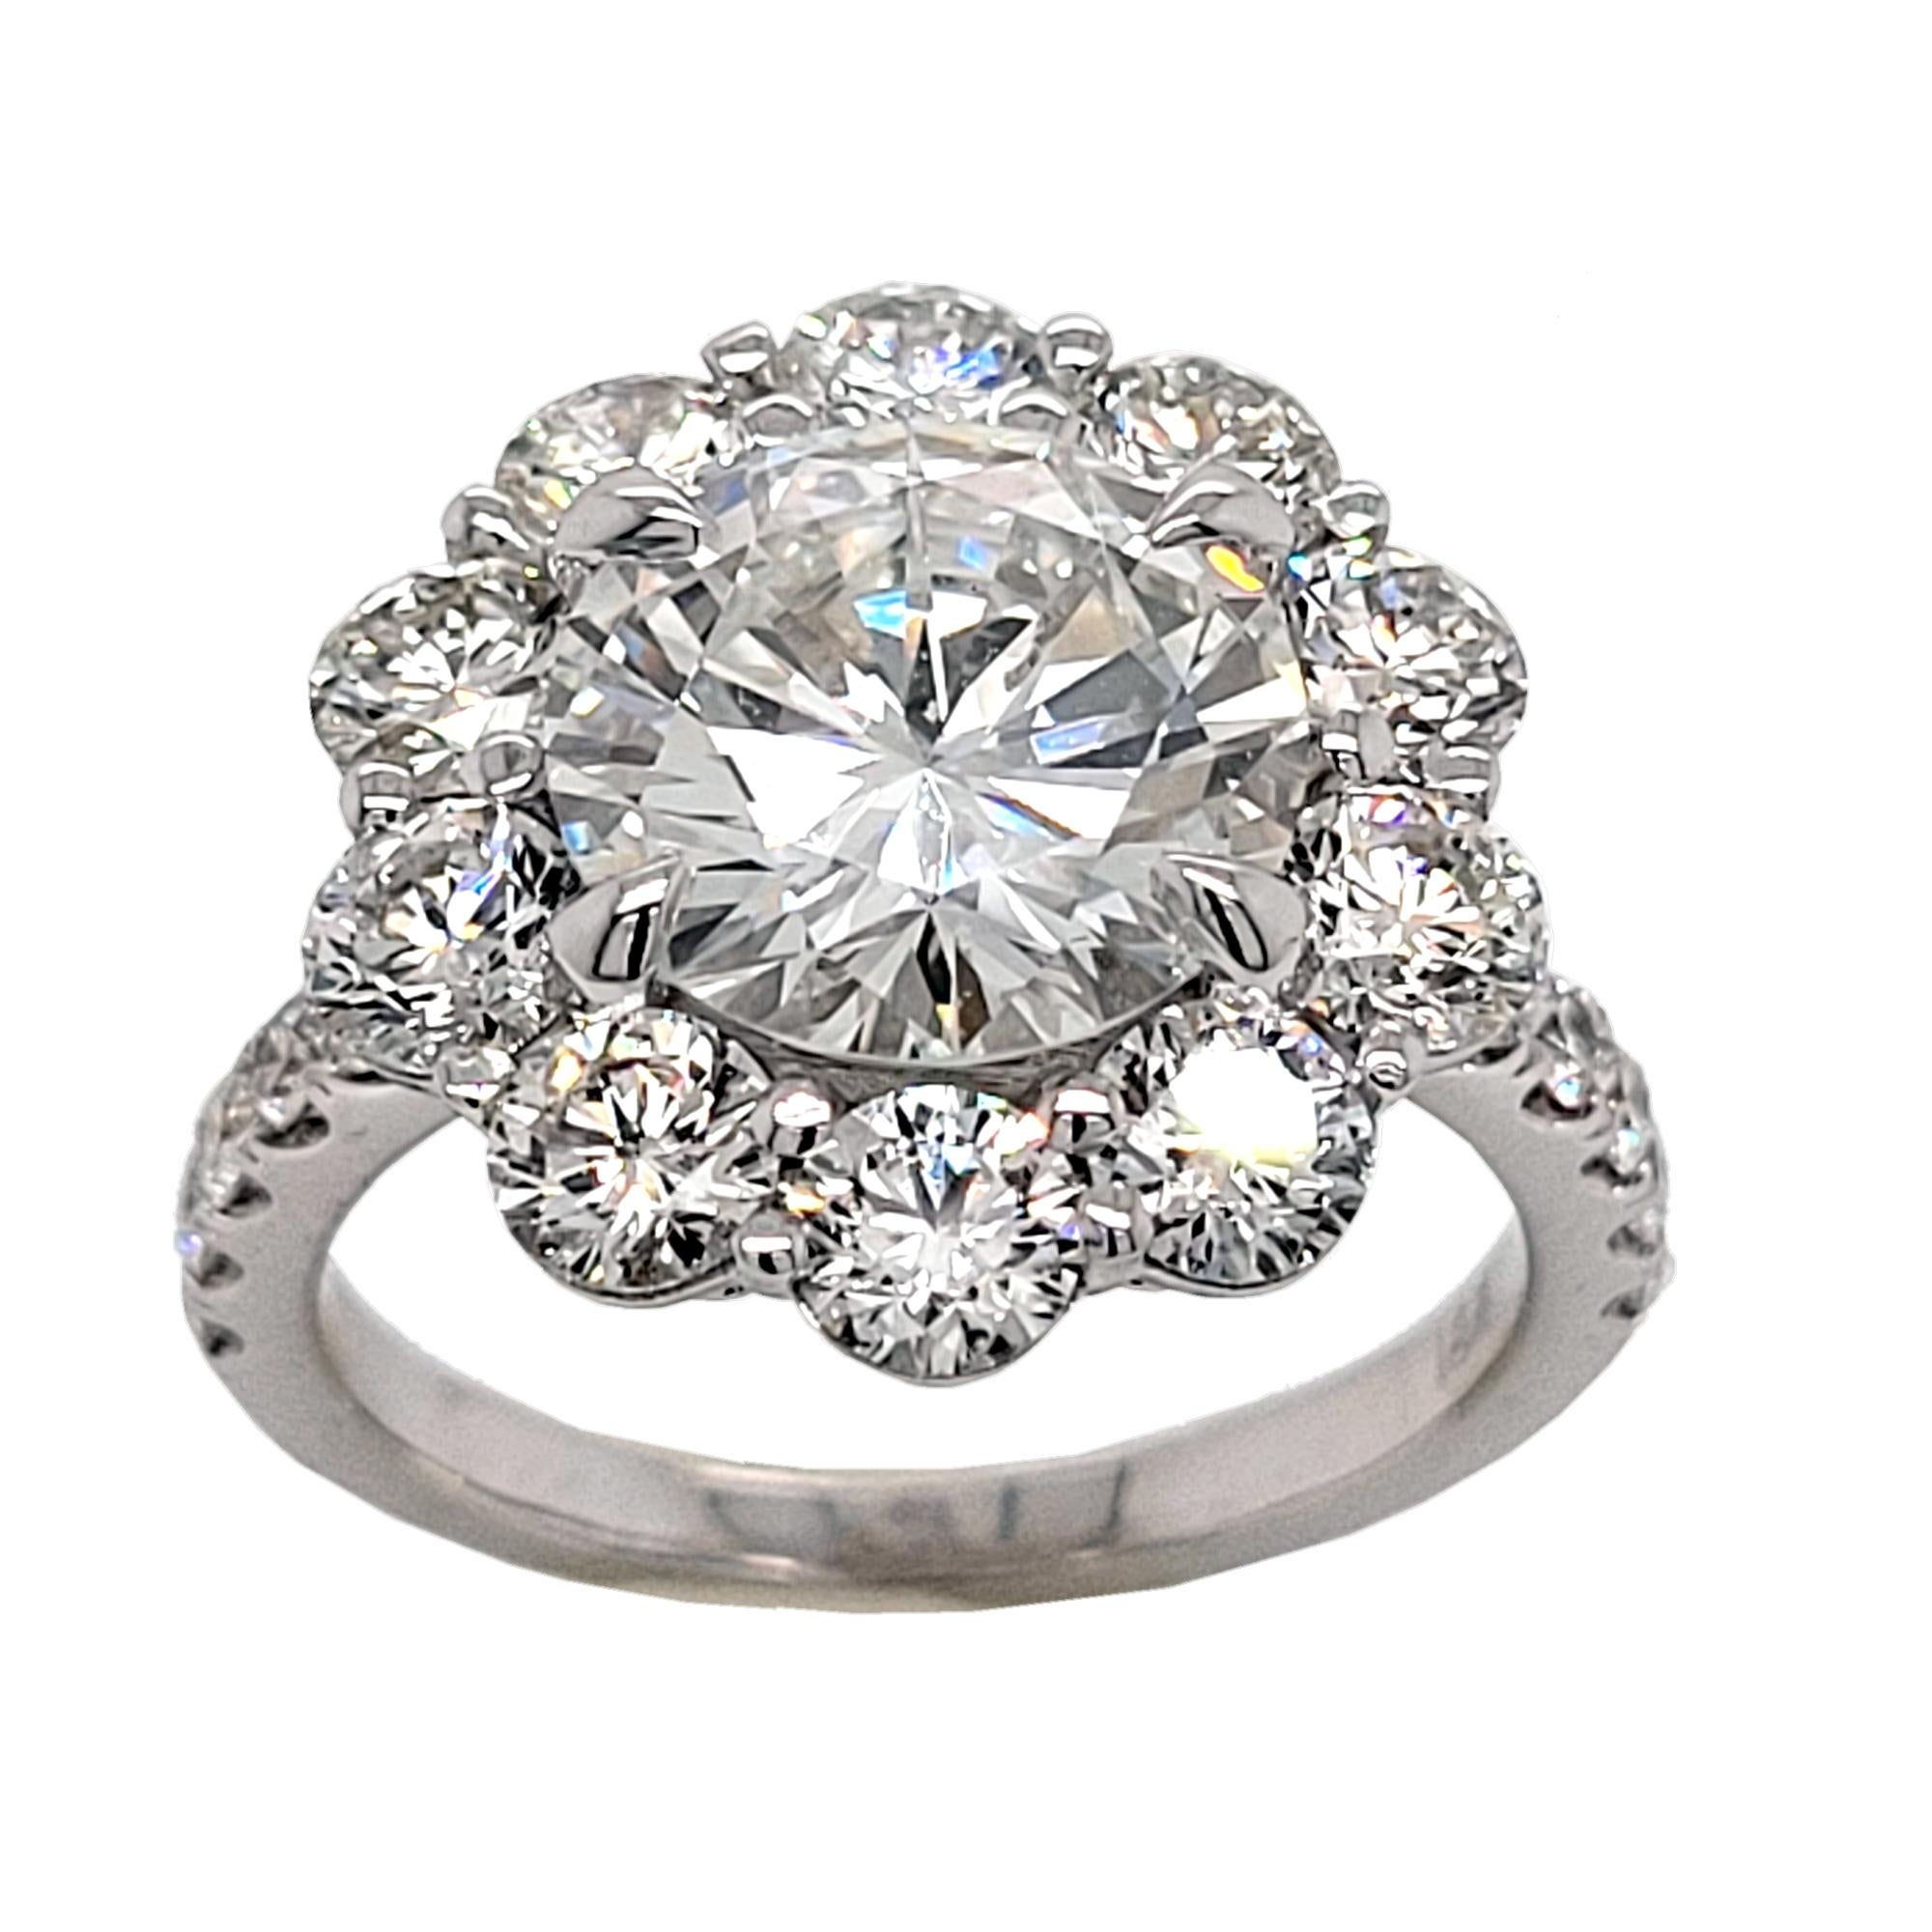 A beautiful GIA Certified Round Brilliant F/VVS2 center Diamond set in a Gorgeous 18K Diamond Engagement Ring with larger stone Halo and side diamonds on the side. Total diamond weight of 2.49 Ct. diamonds on the side. 

Diamond specs:
Center stone: